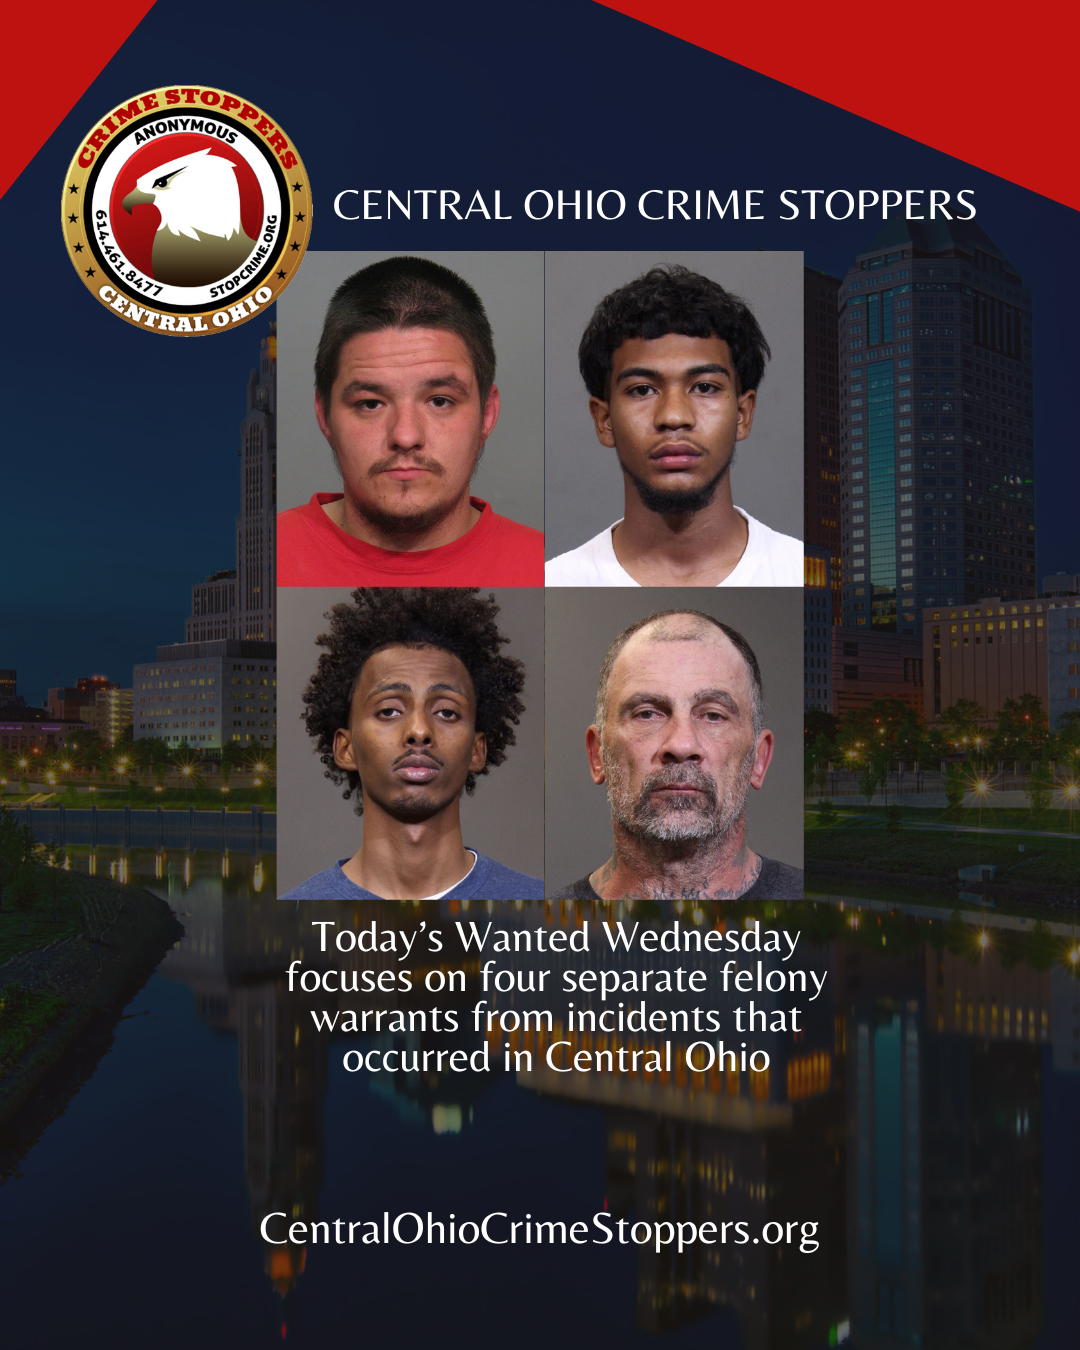 Today’s Wanted Wednesday focuses on four separate felony warrants from incidents that occurred in Central Ohio.